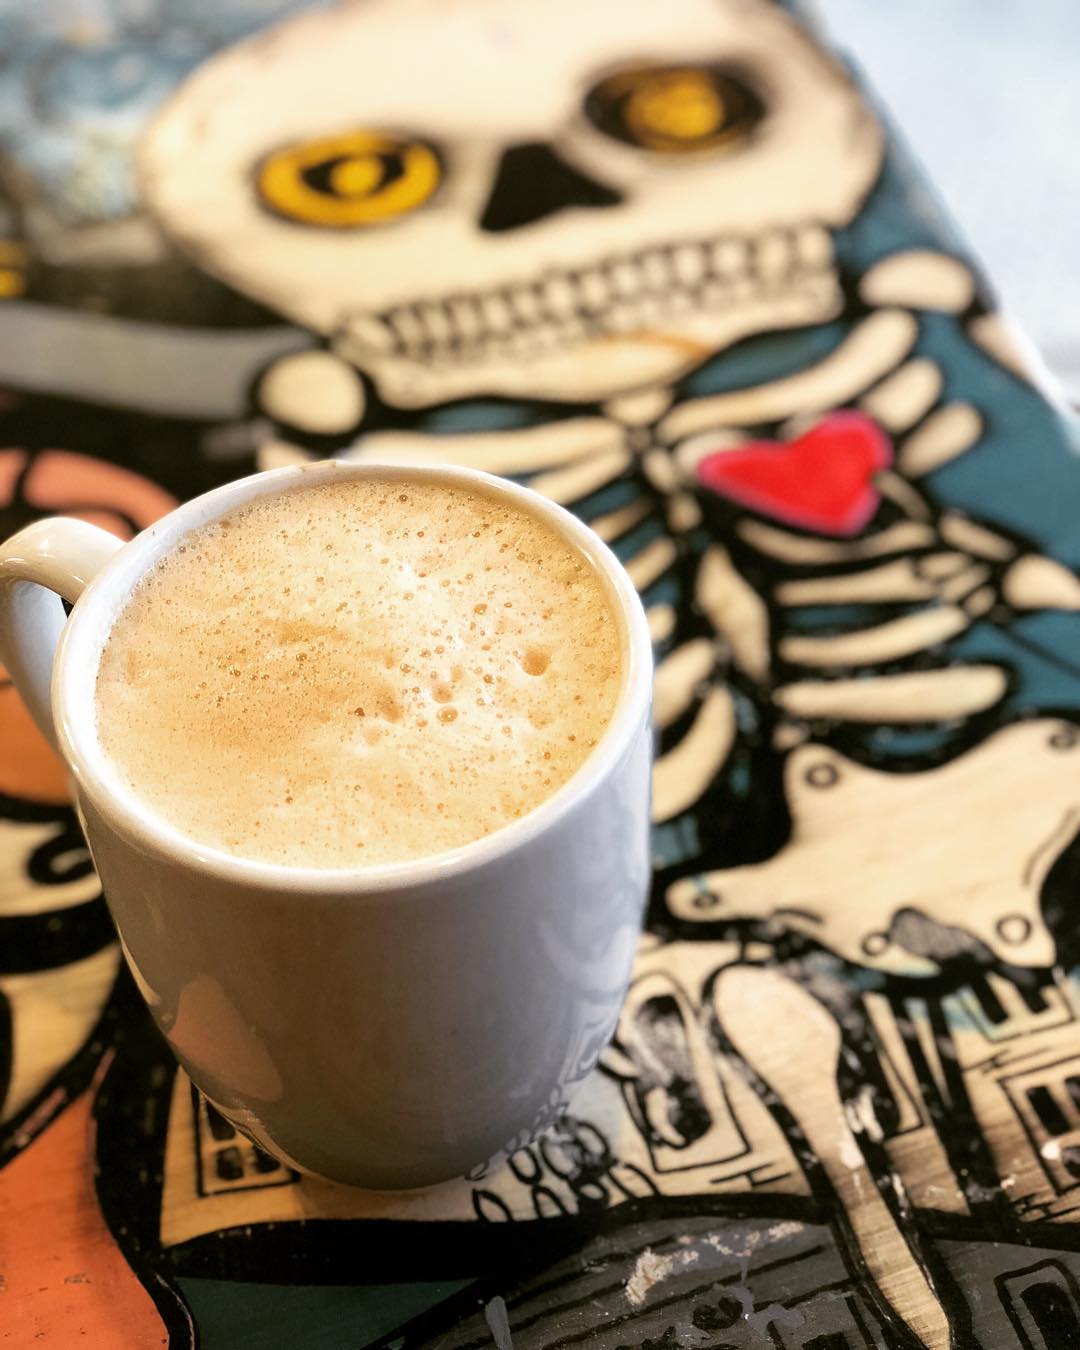 Cup of Coffee on a Table at Cafe Jumping Bean in Chicago. Photo by Instagram user @danielledrinkschicago